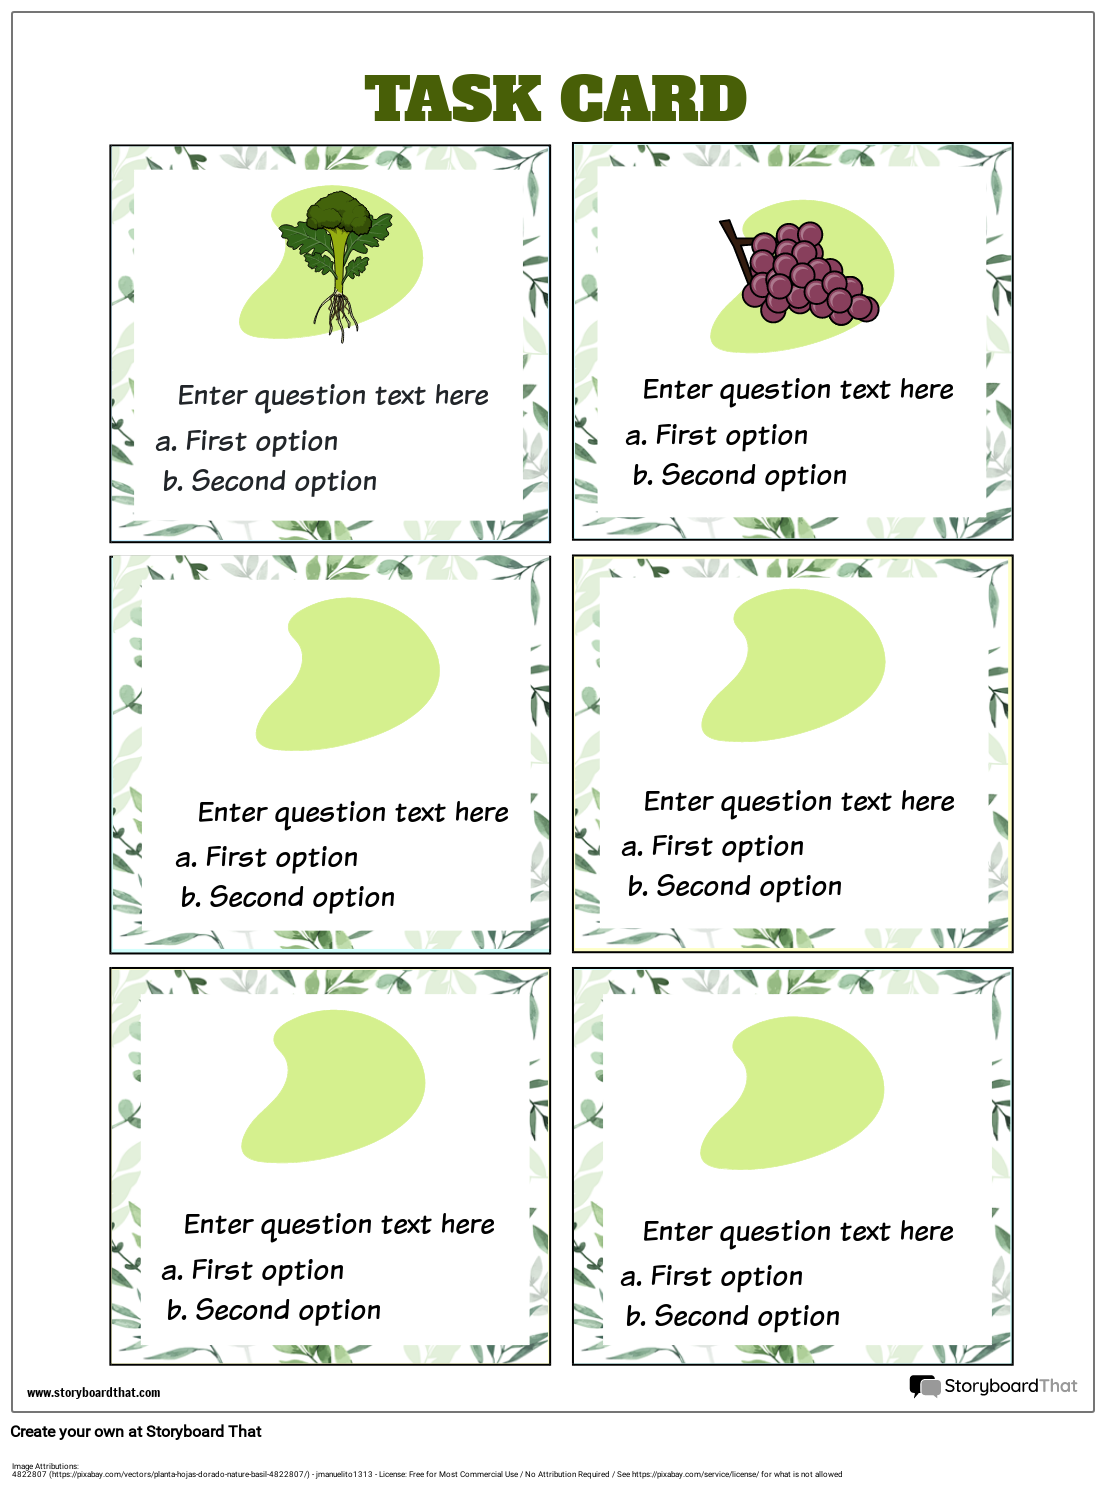 Task Card Worksheet Template with Food Options